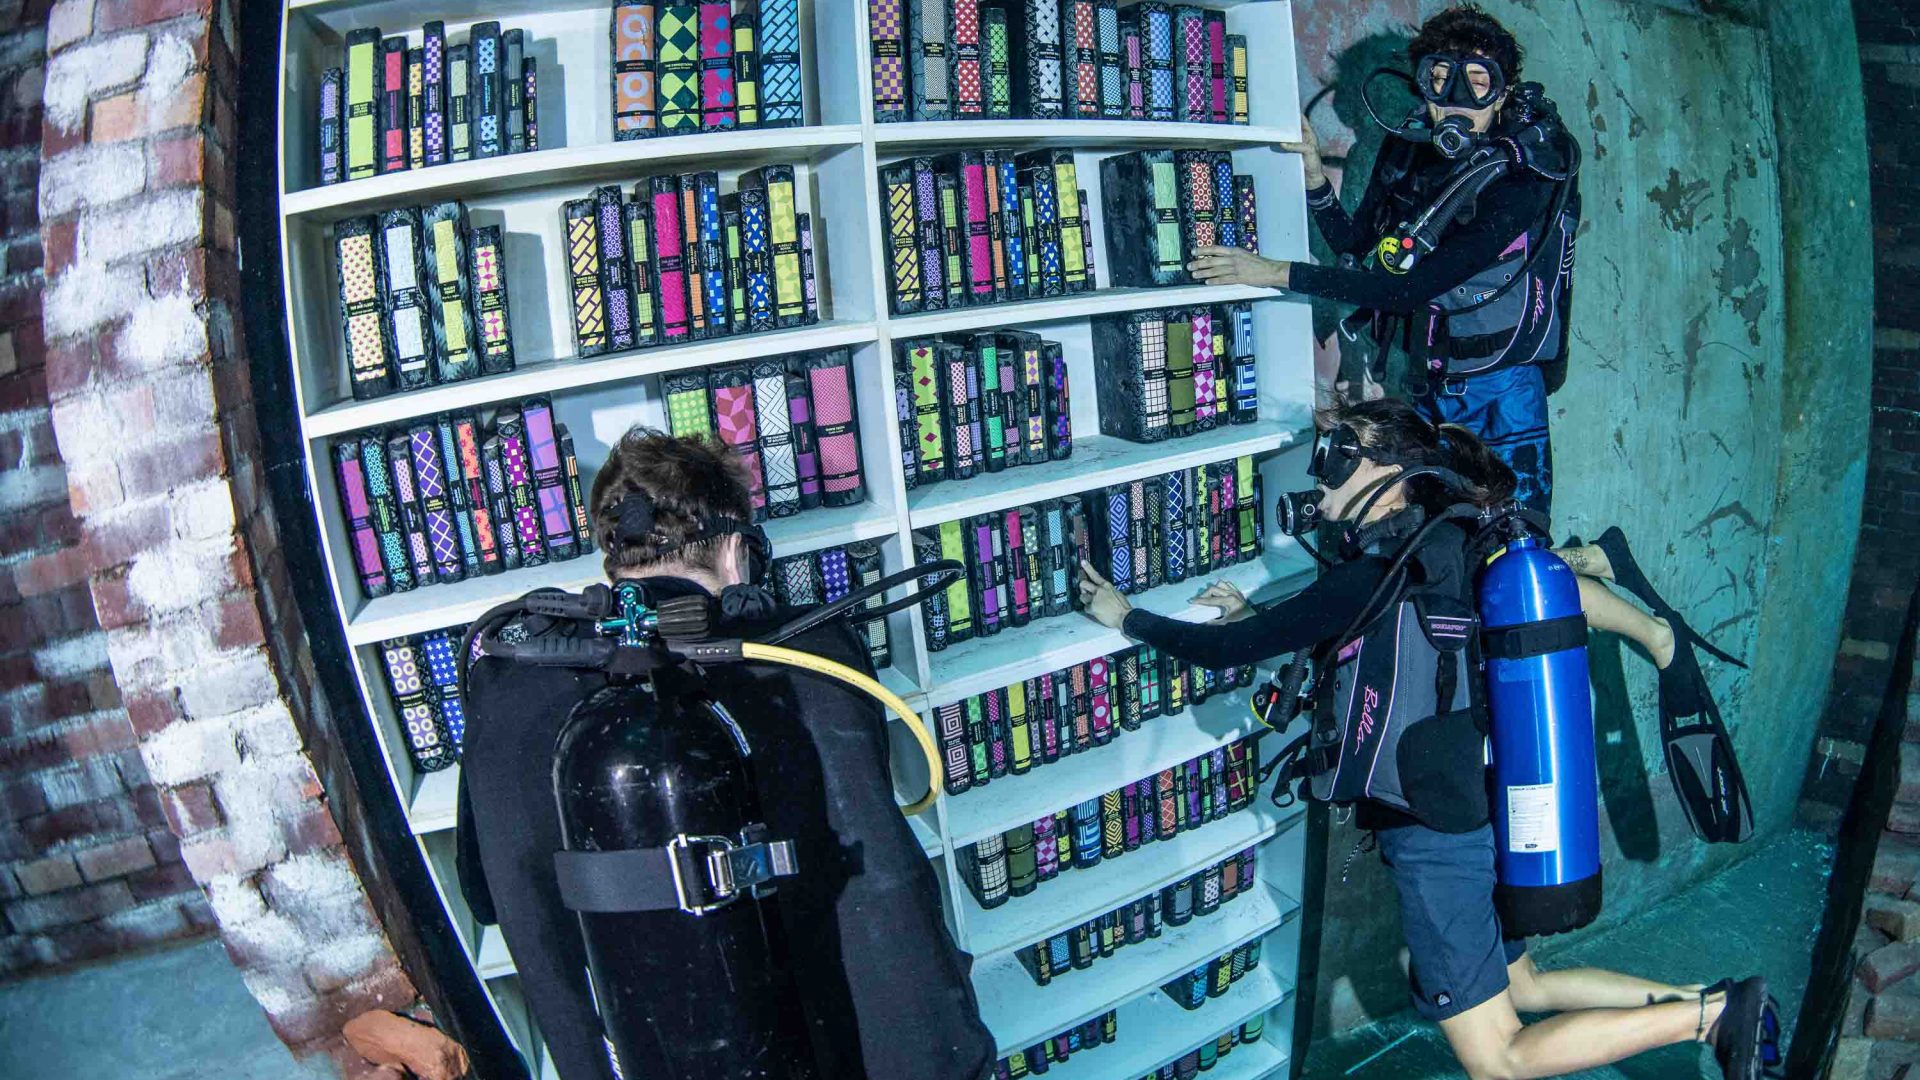 Divers come up against an underwater bookshelf.